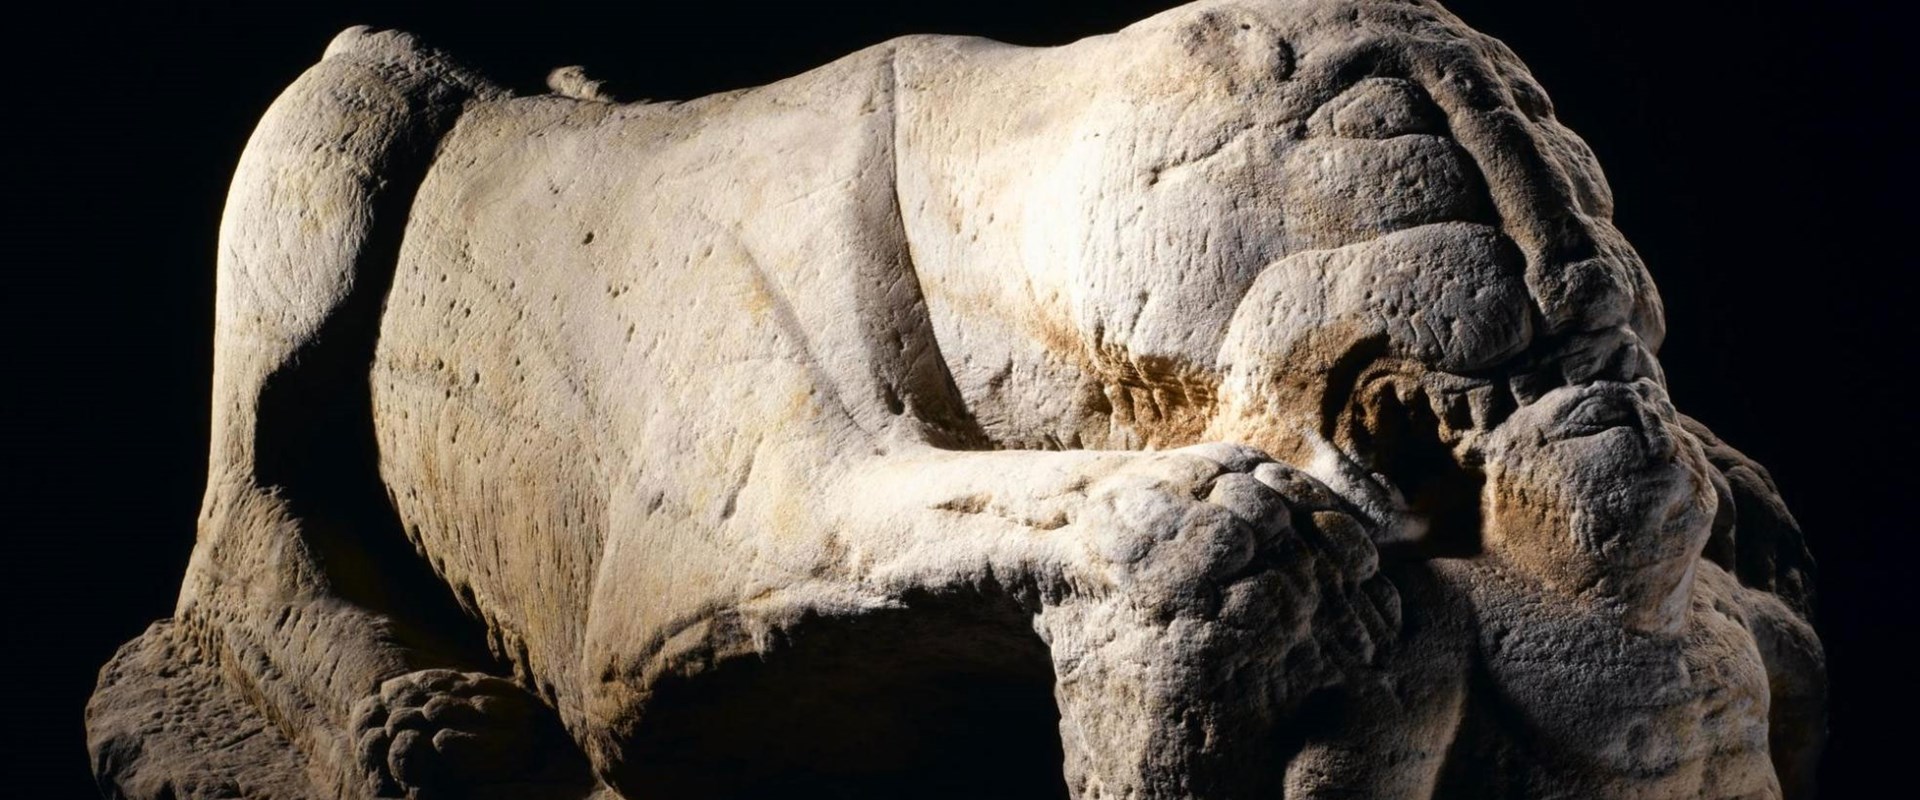 The Cramond Lioness, a Roman monument found in the mud of the River Almond by ferryman Robert Graham in 1997.